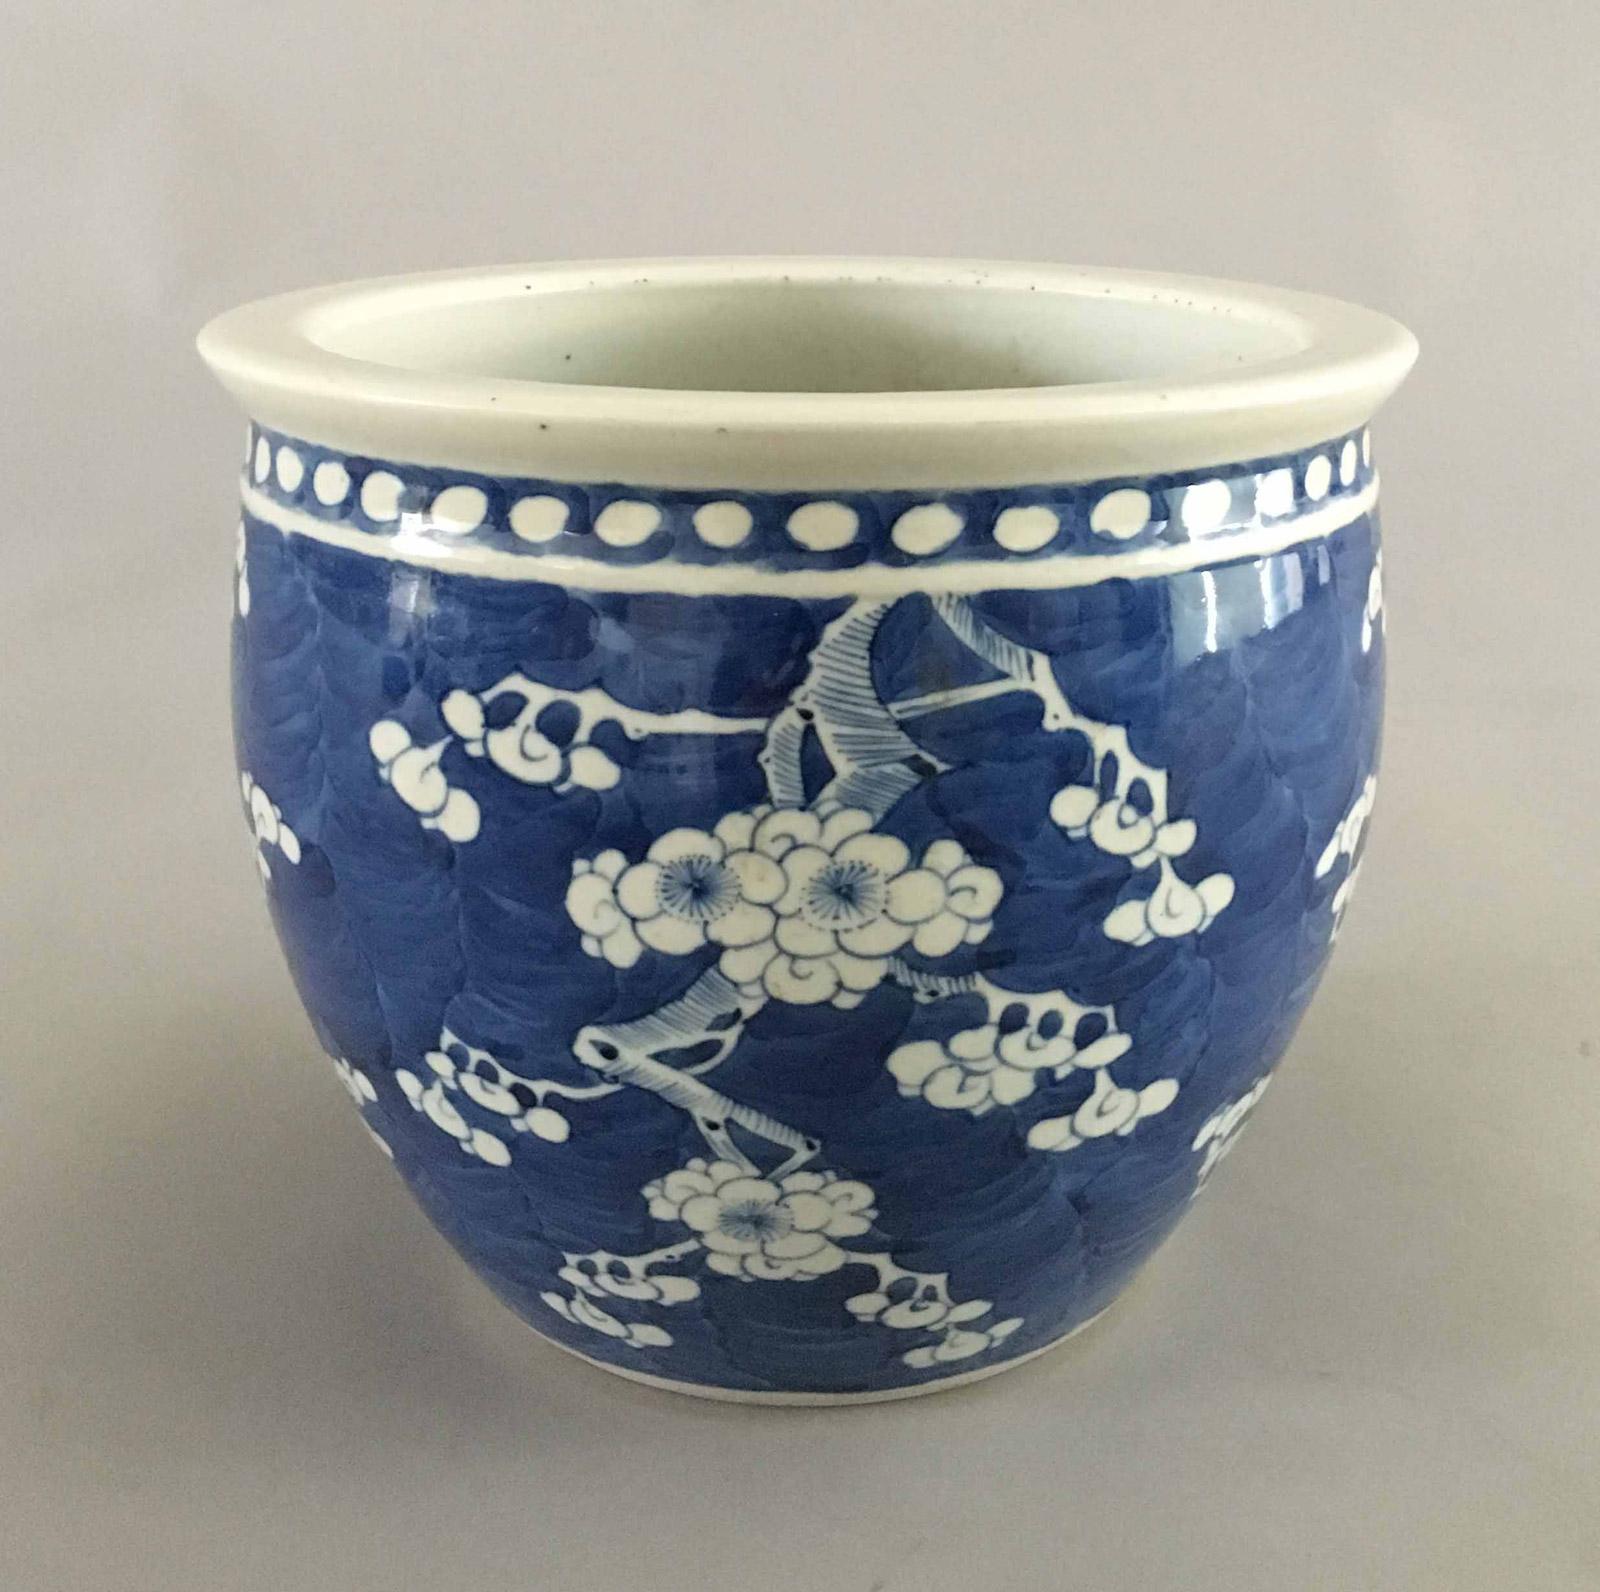 Chinese Export porcelain blue and white jardiniere decorated with prunus branches and blossoms, against a brilliant underglaze cobalt blue background, with a four-character mark to the base.